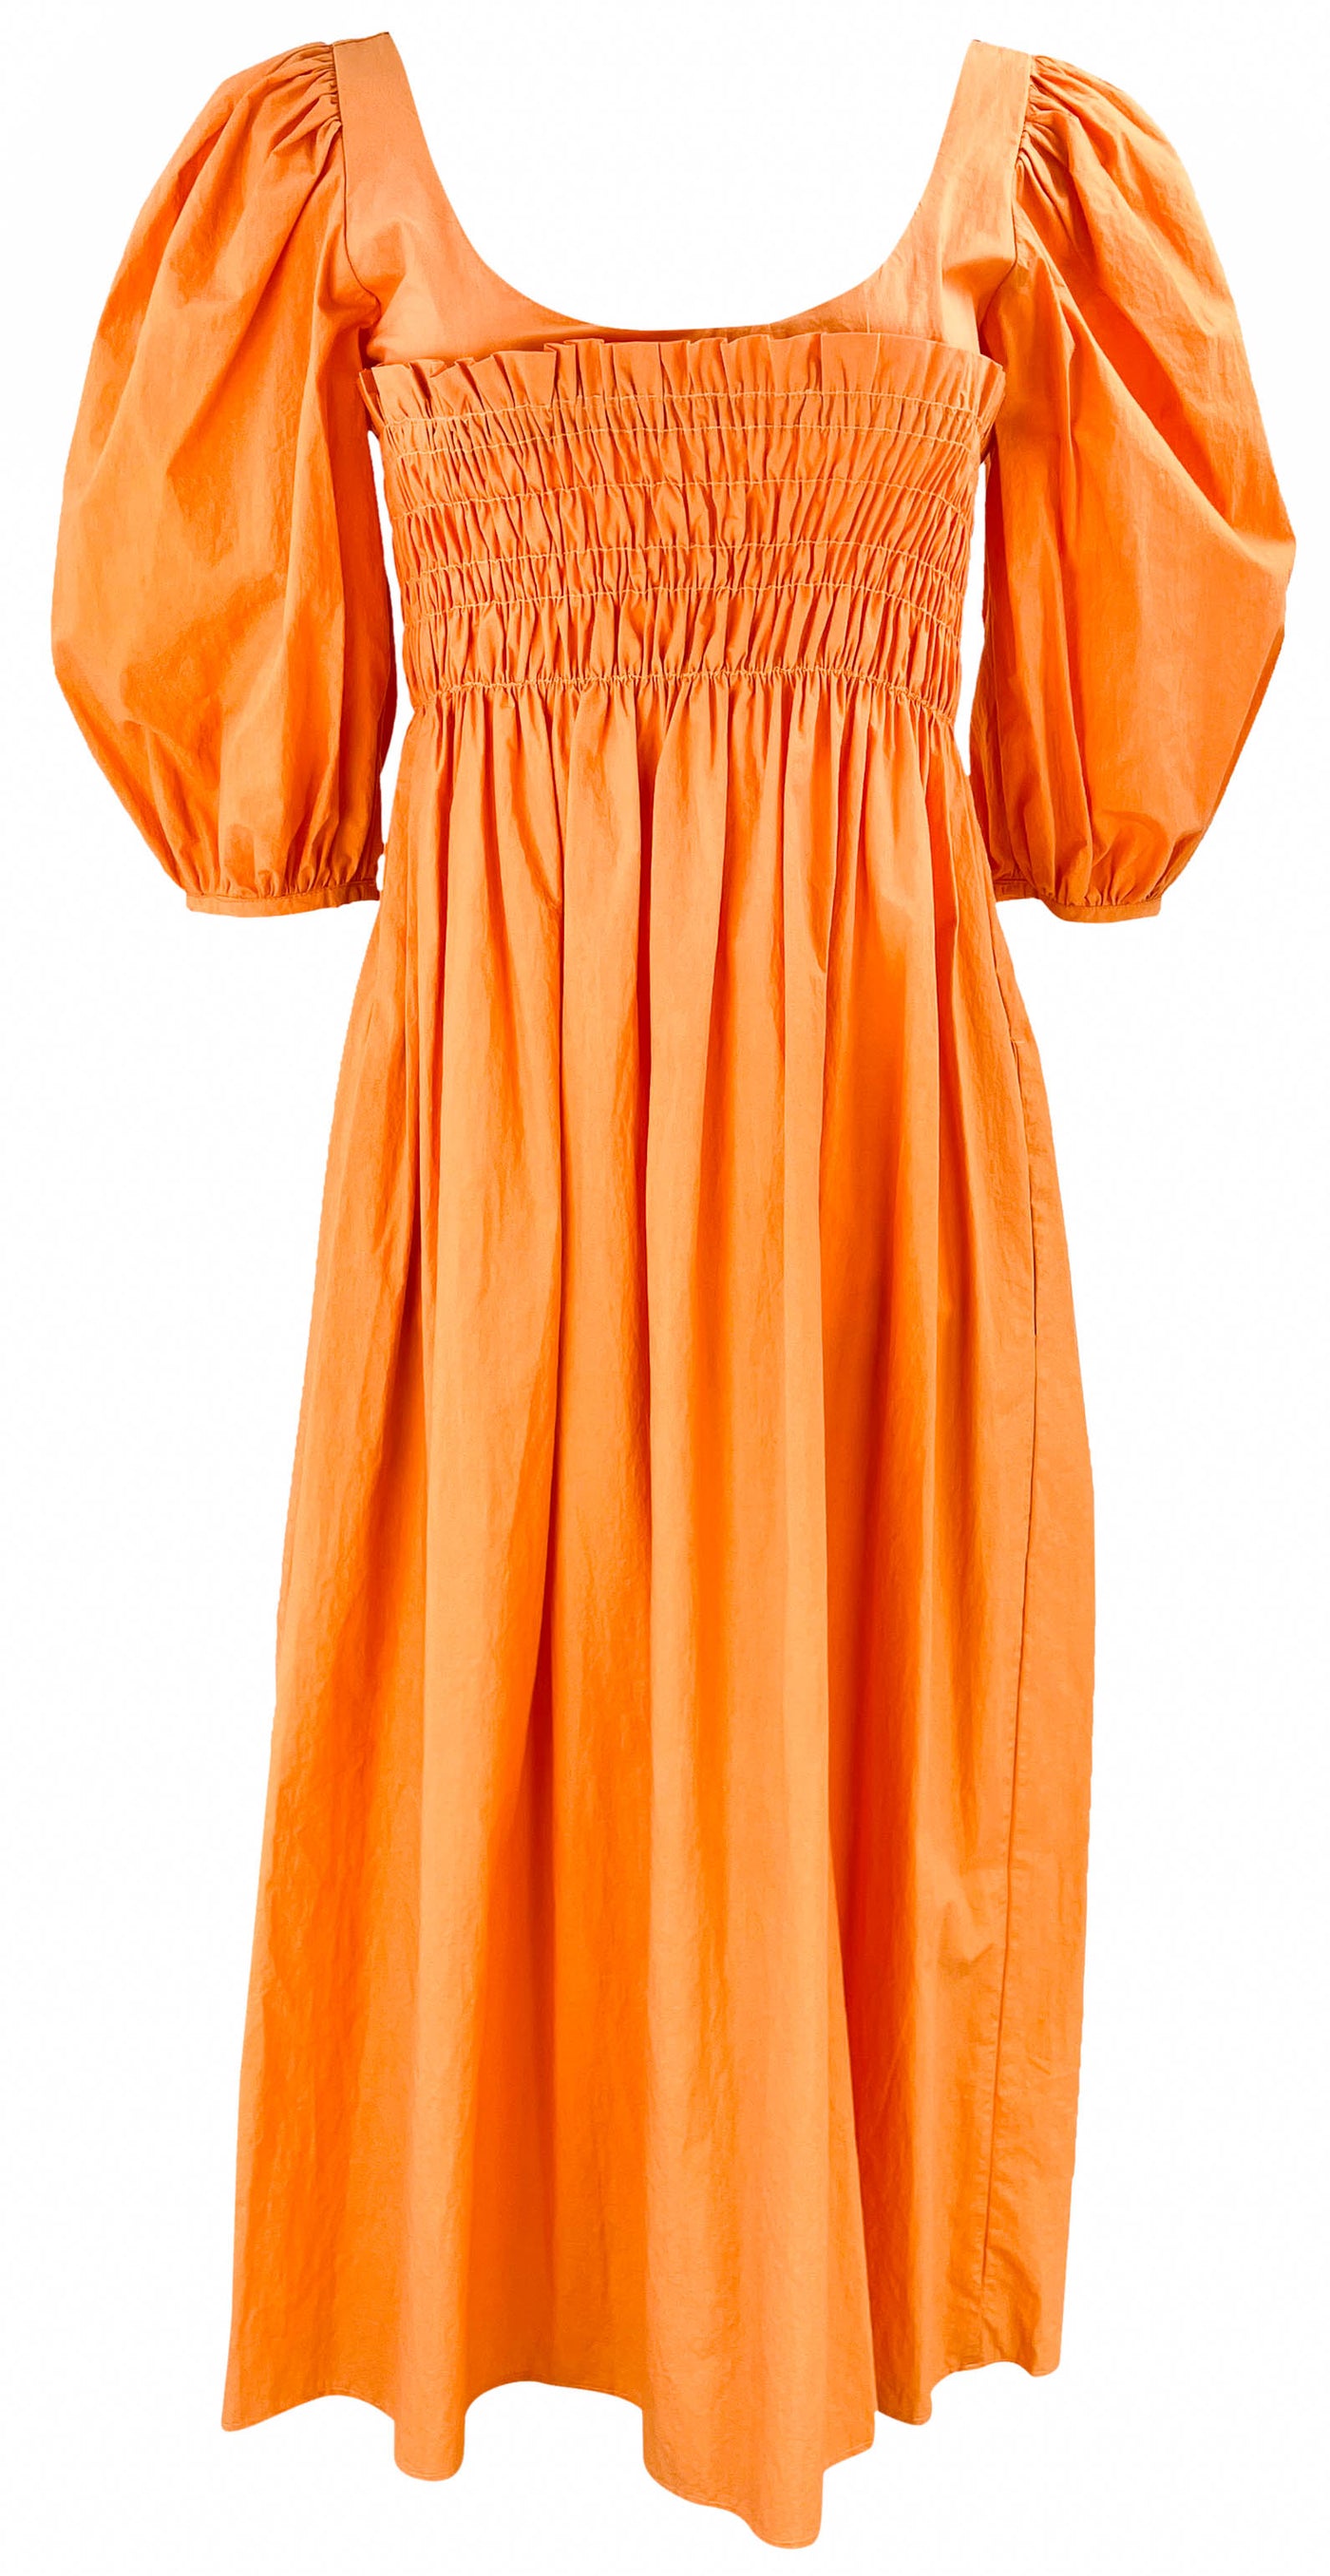 Ciao Lucia! Veneto Dress in Apricot - Discounts on Ciao Lucia! at UAL